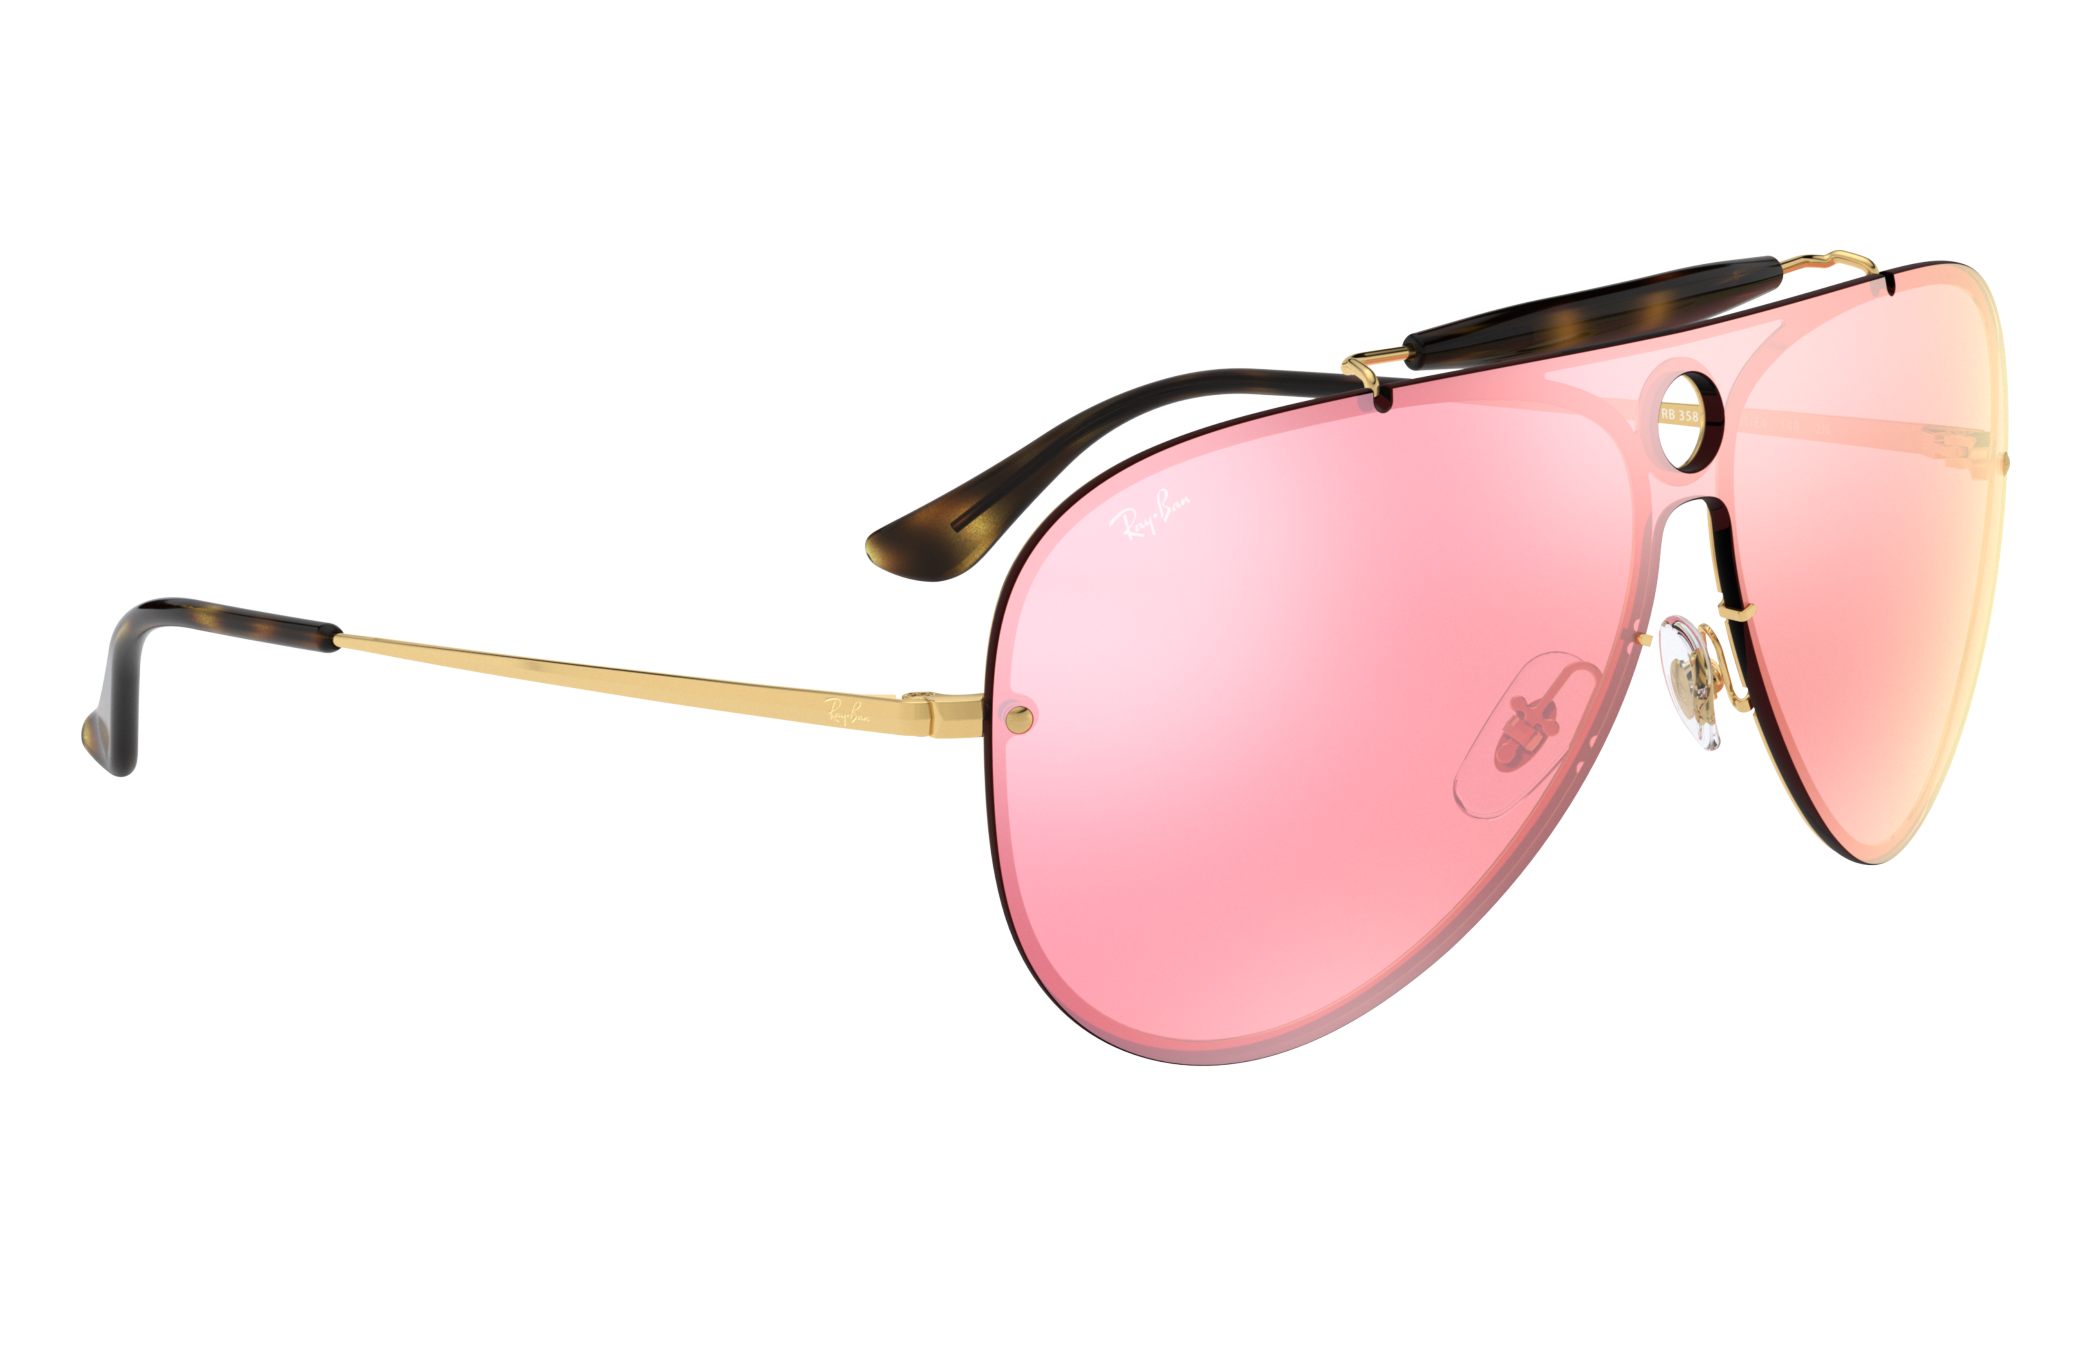 CONTEMPORARY MODERN SHIELD Style SUN GLASSES Gold Metal Fashion Frame Pink Lens 